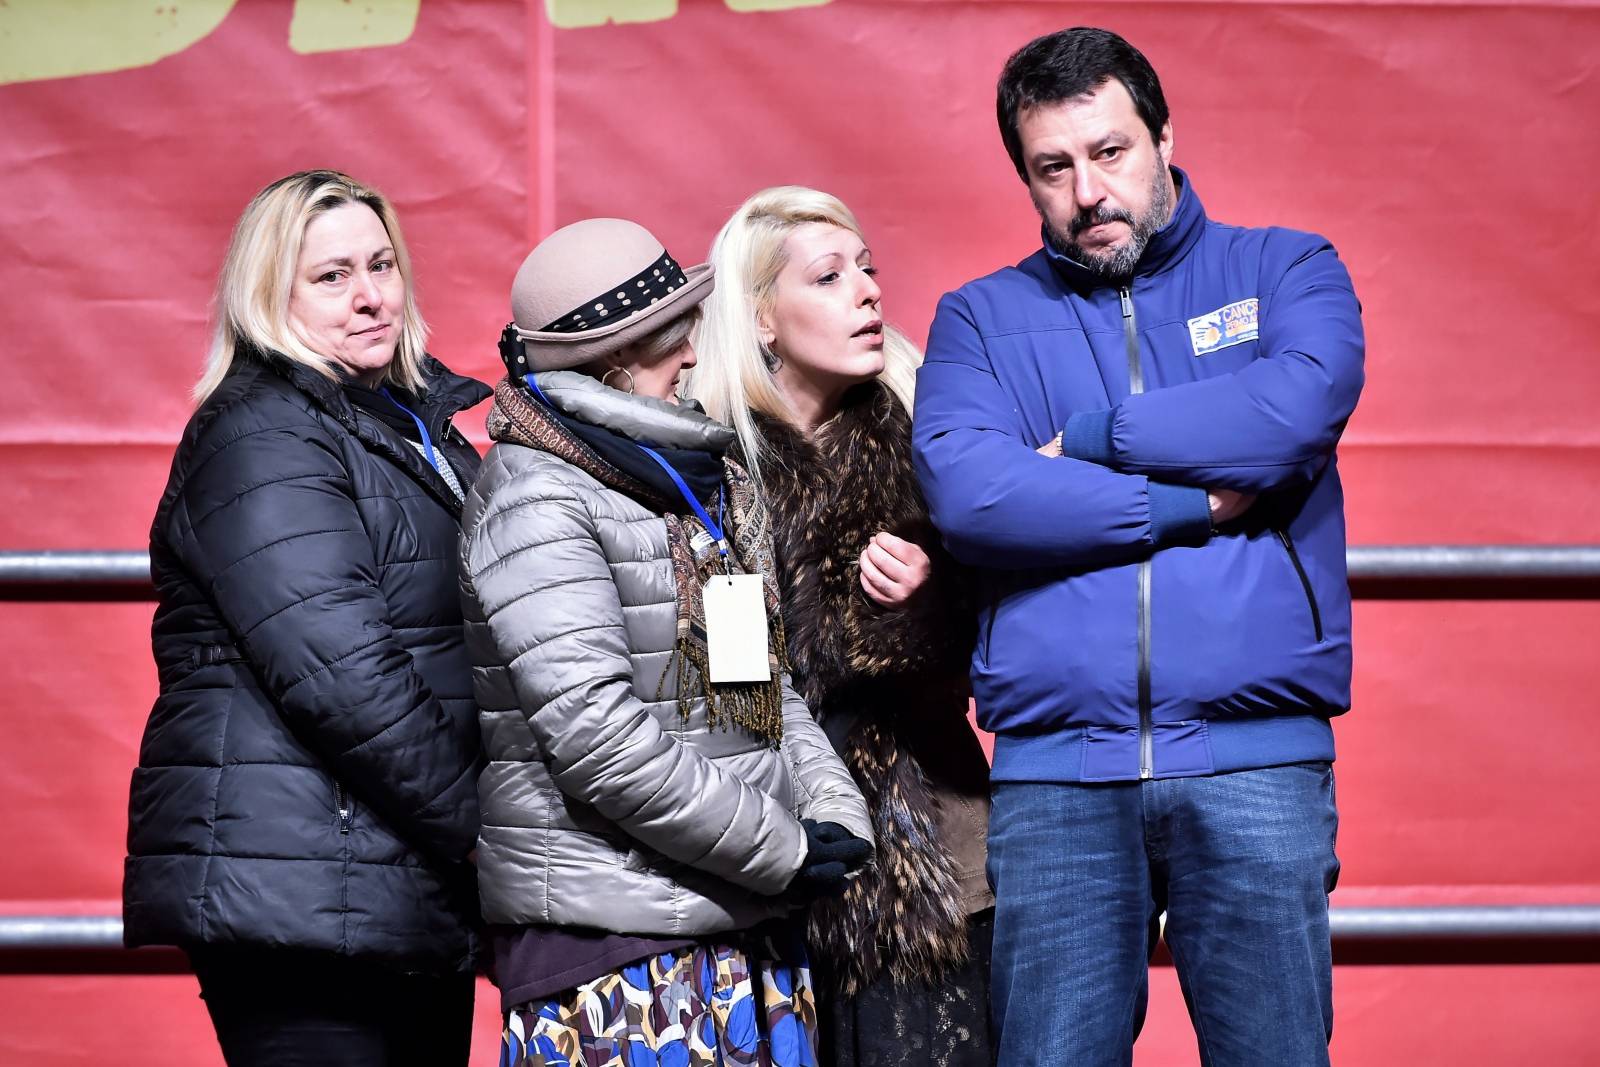 Leader of Italy's far-right League party Matteo Salvini looks on during a rally ahead of regional election, in Bibbiano